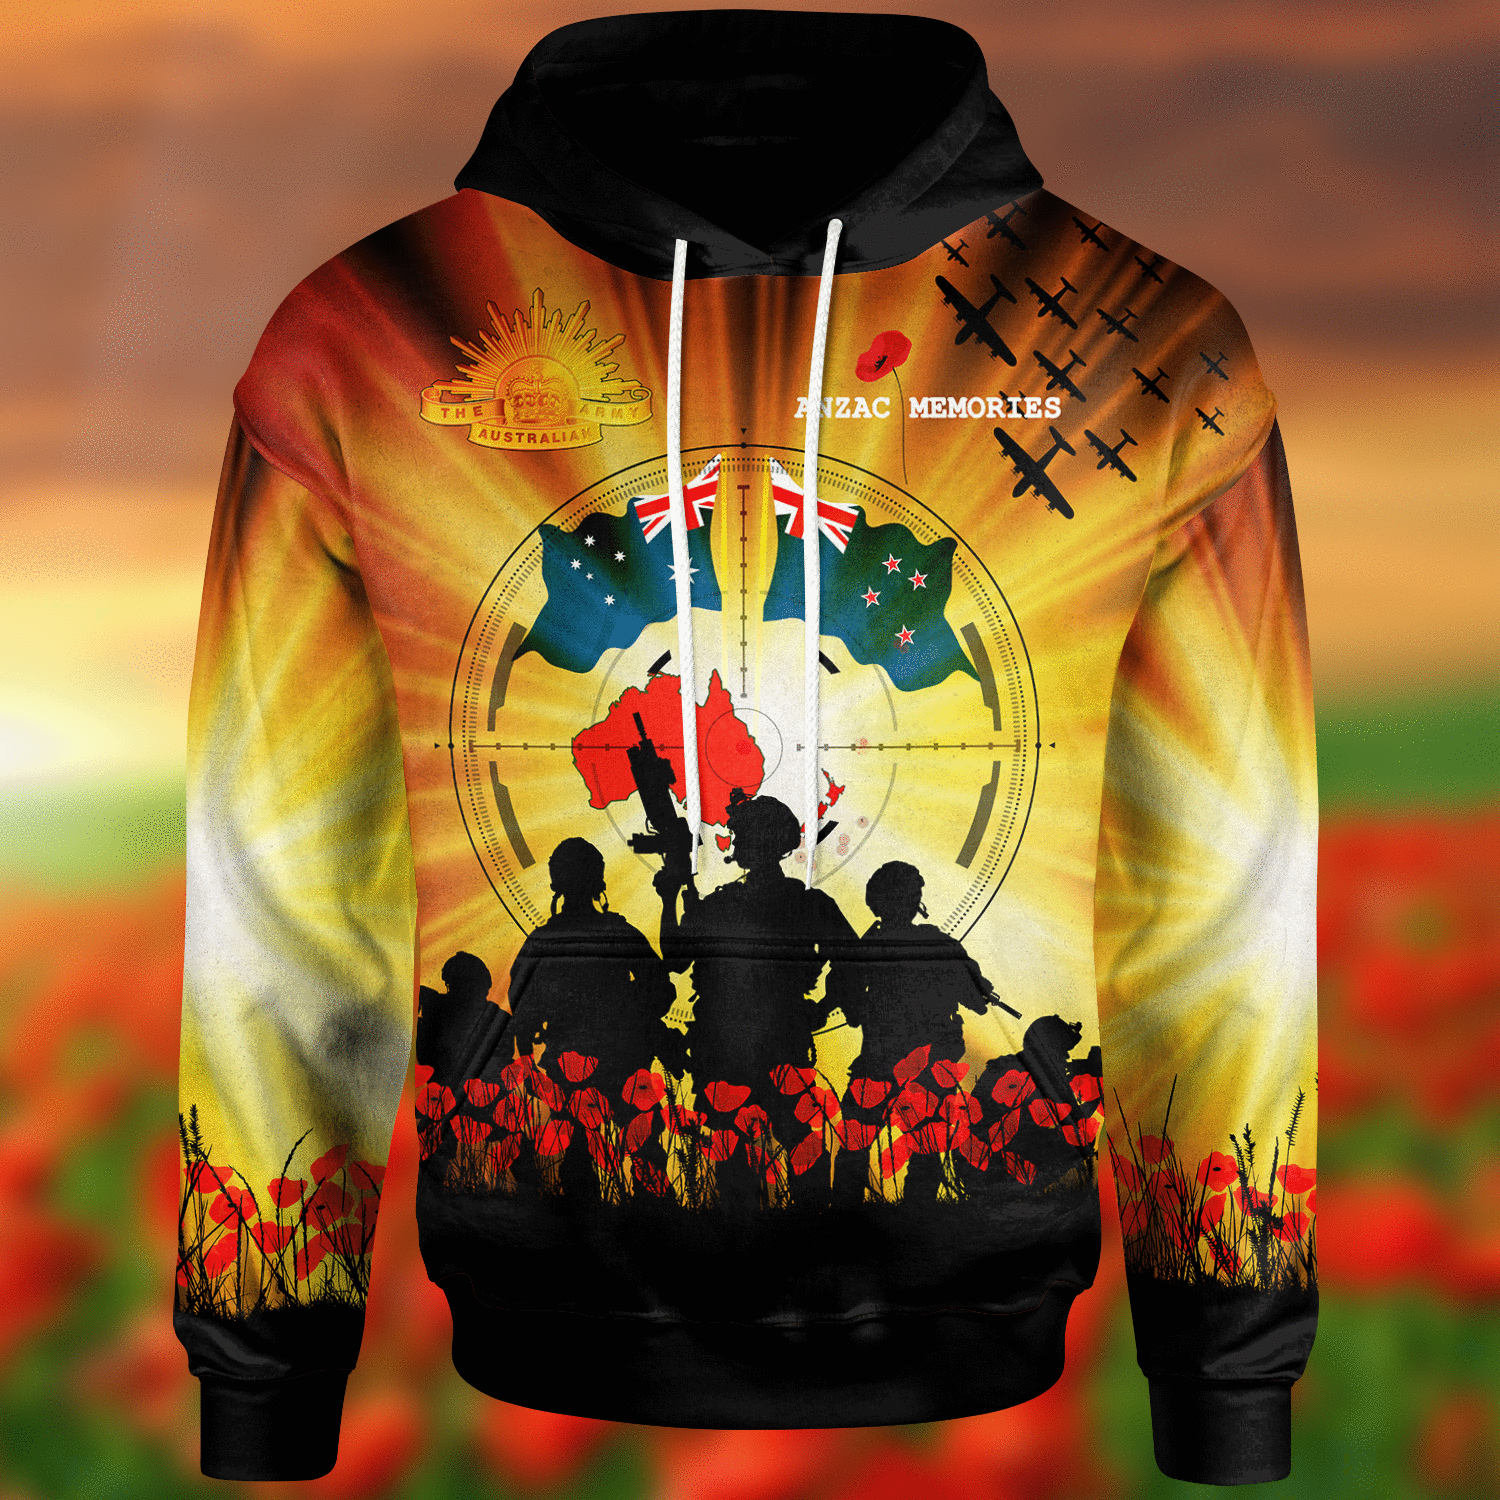 and-new-zealand-anzac-day-hoodie-anzac-memories